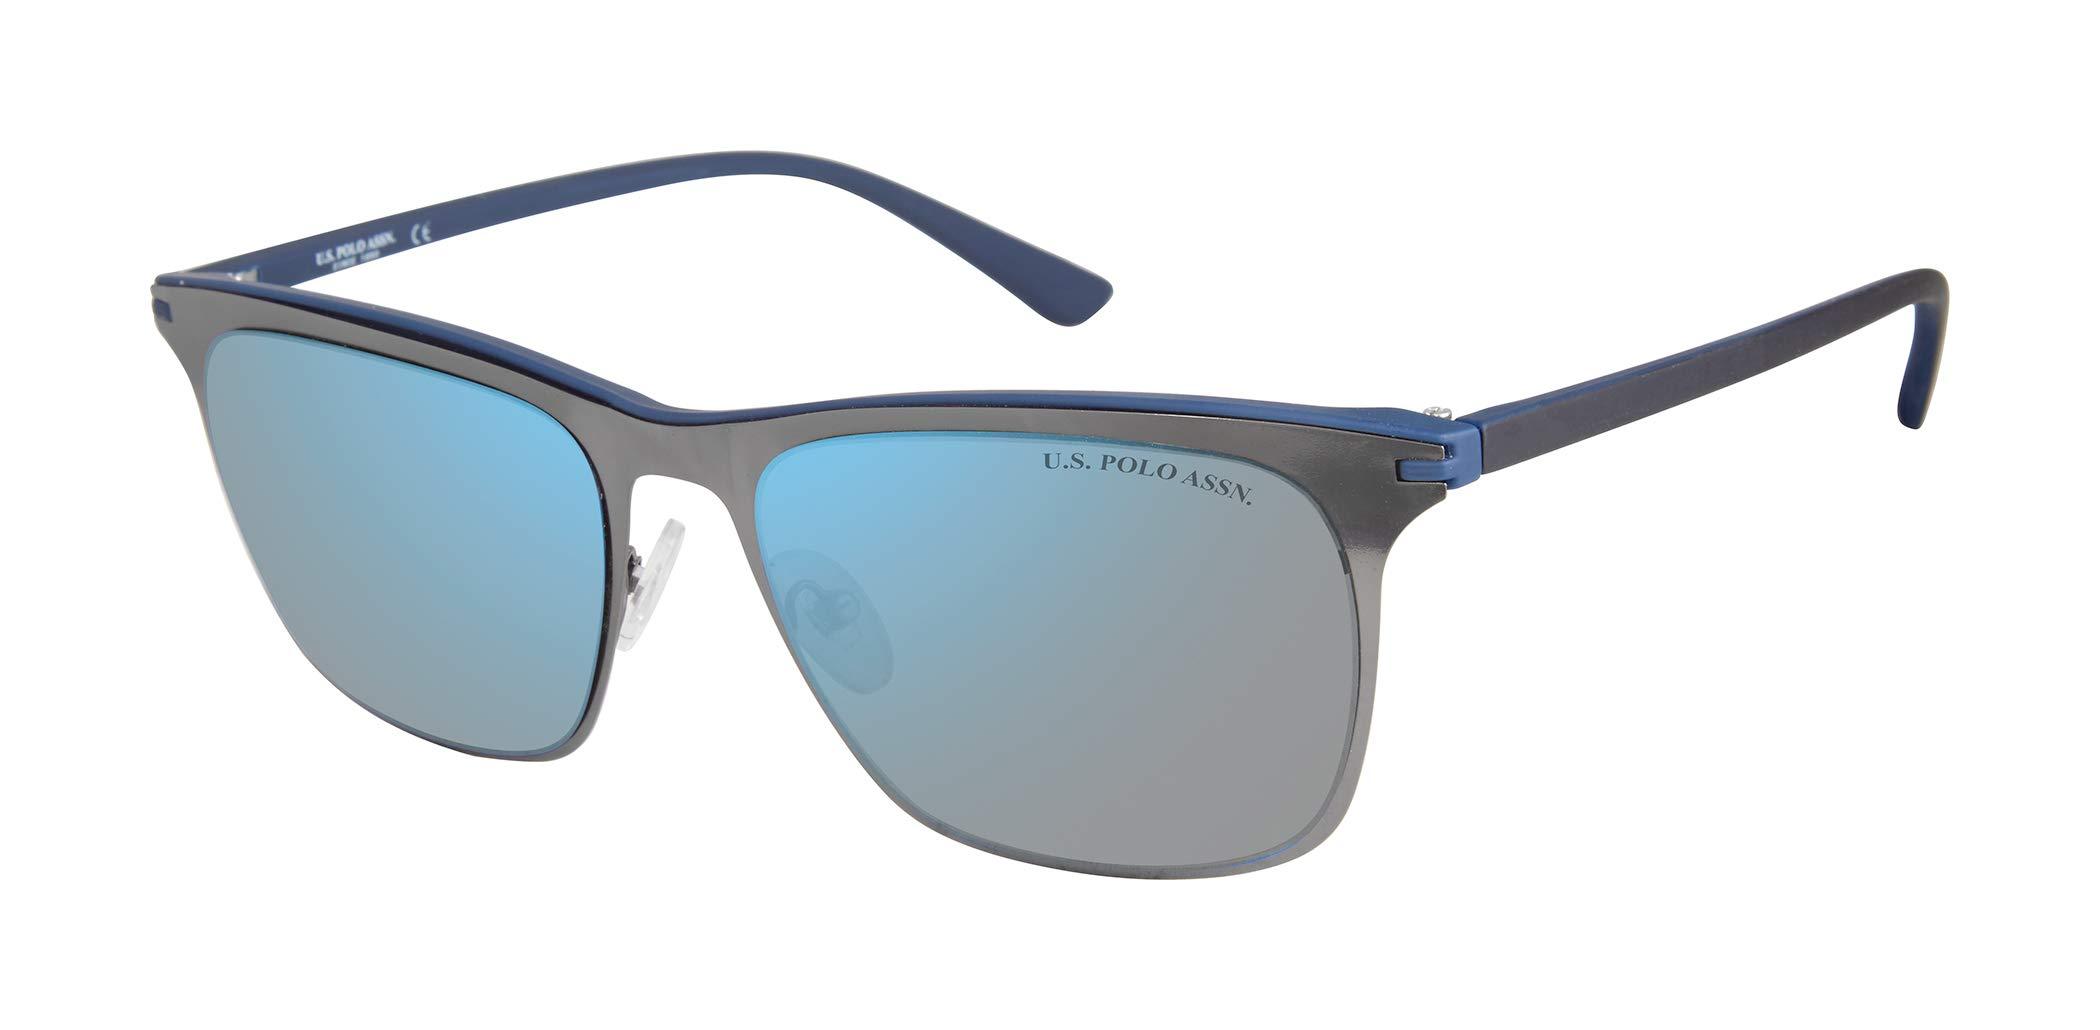 U.S. POLO ASSN. Pa1037 Metal Rectangular Sunglasses With Mirrored Lens And  100% Uv Protection in Gun/Blue (Blue) for Men - Save 18% - Lyst